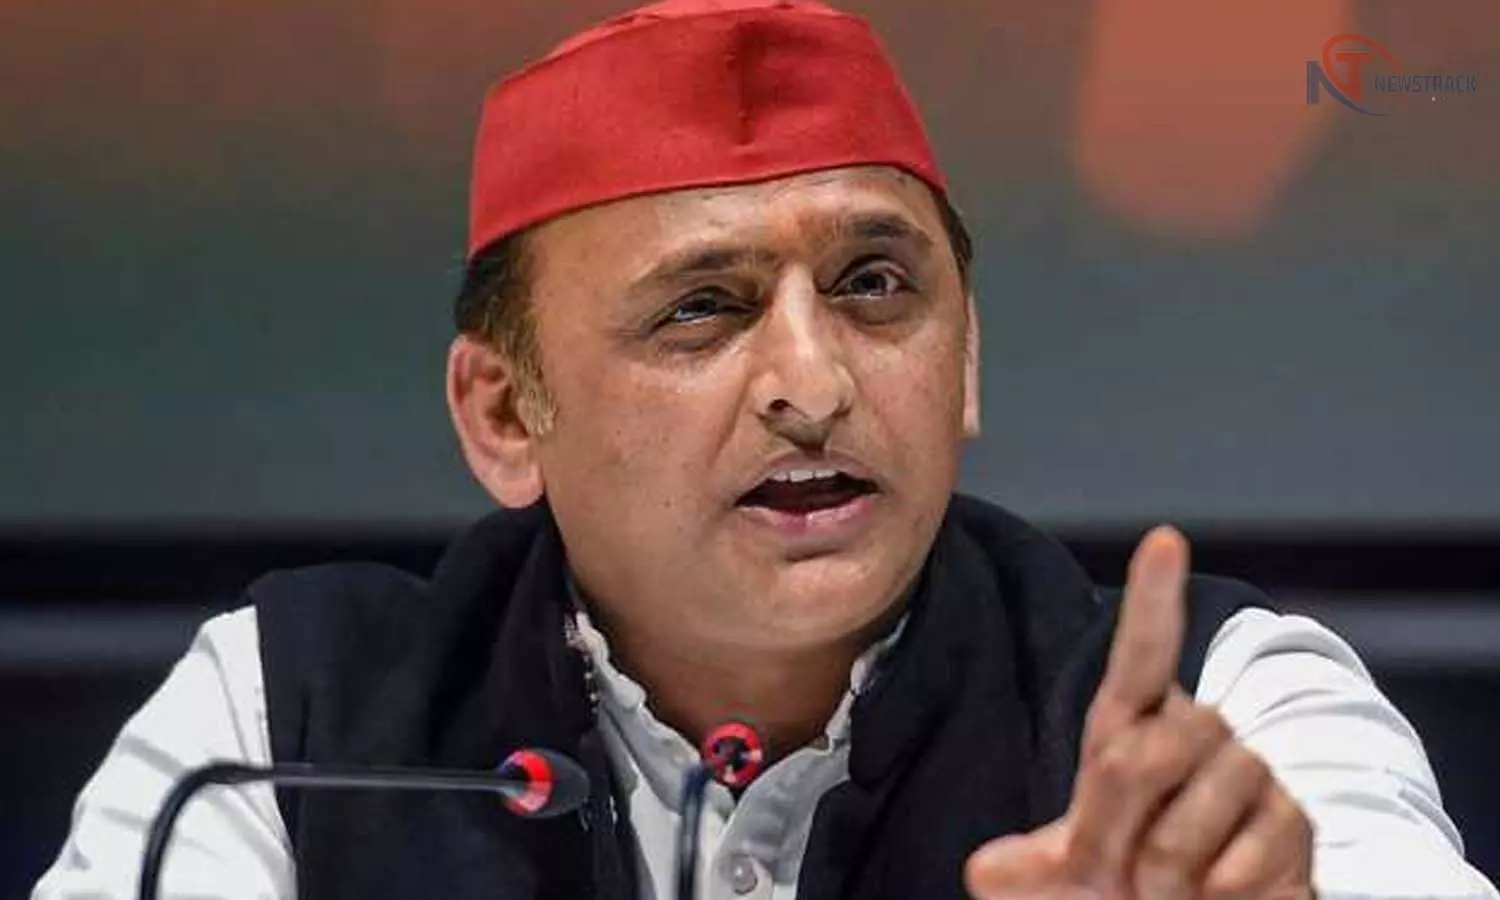 SP chief Akhilesh Yadav took a jibe at the government through his tweet